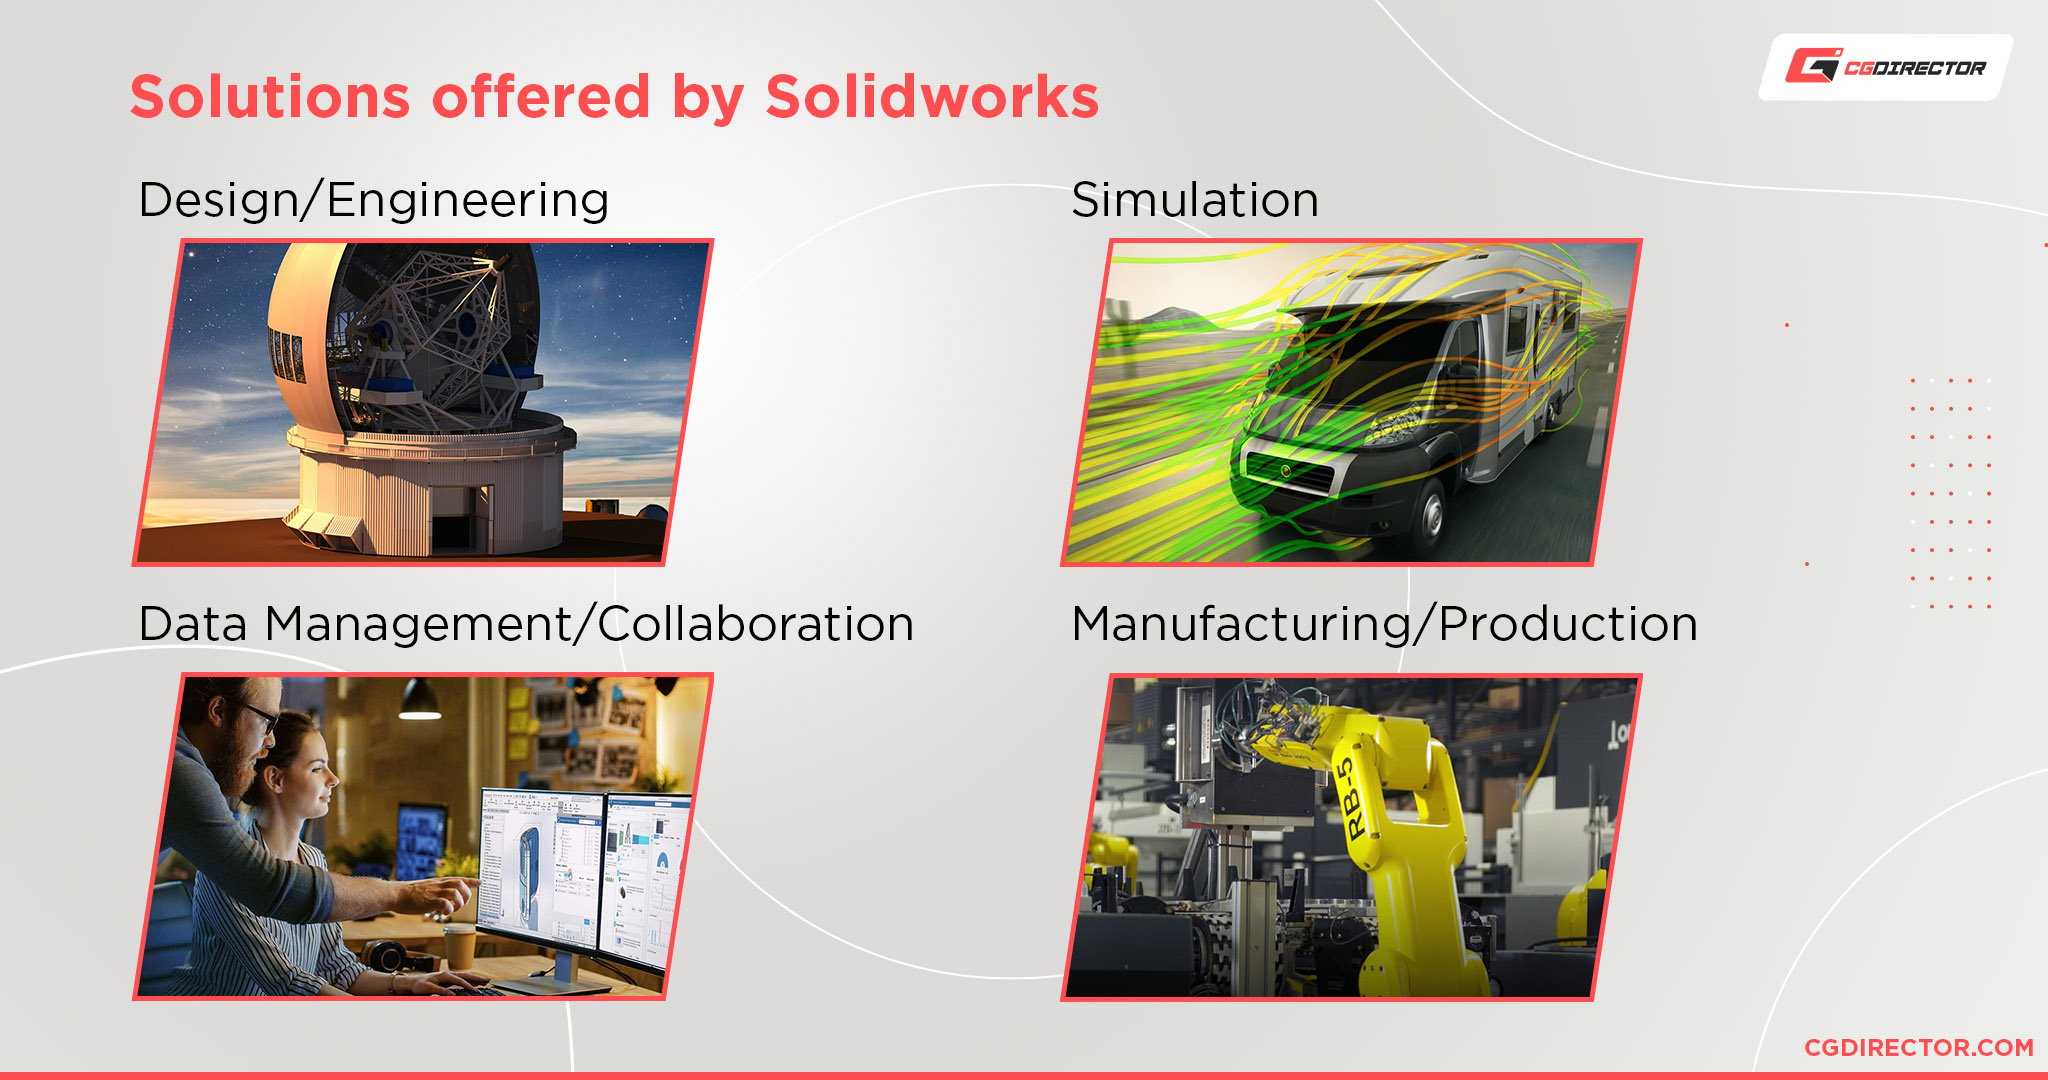 Applications of Solidworks